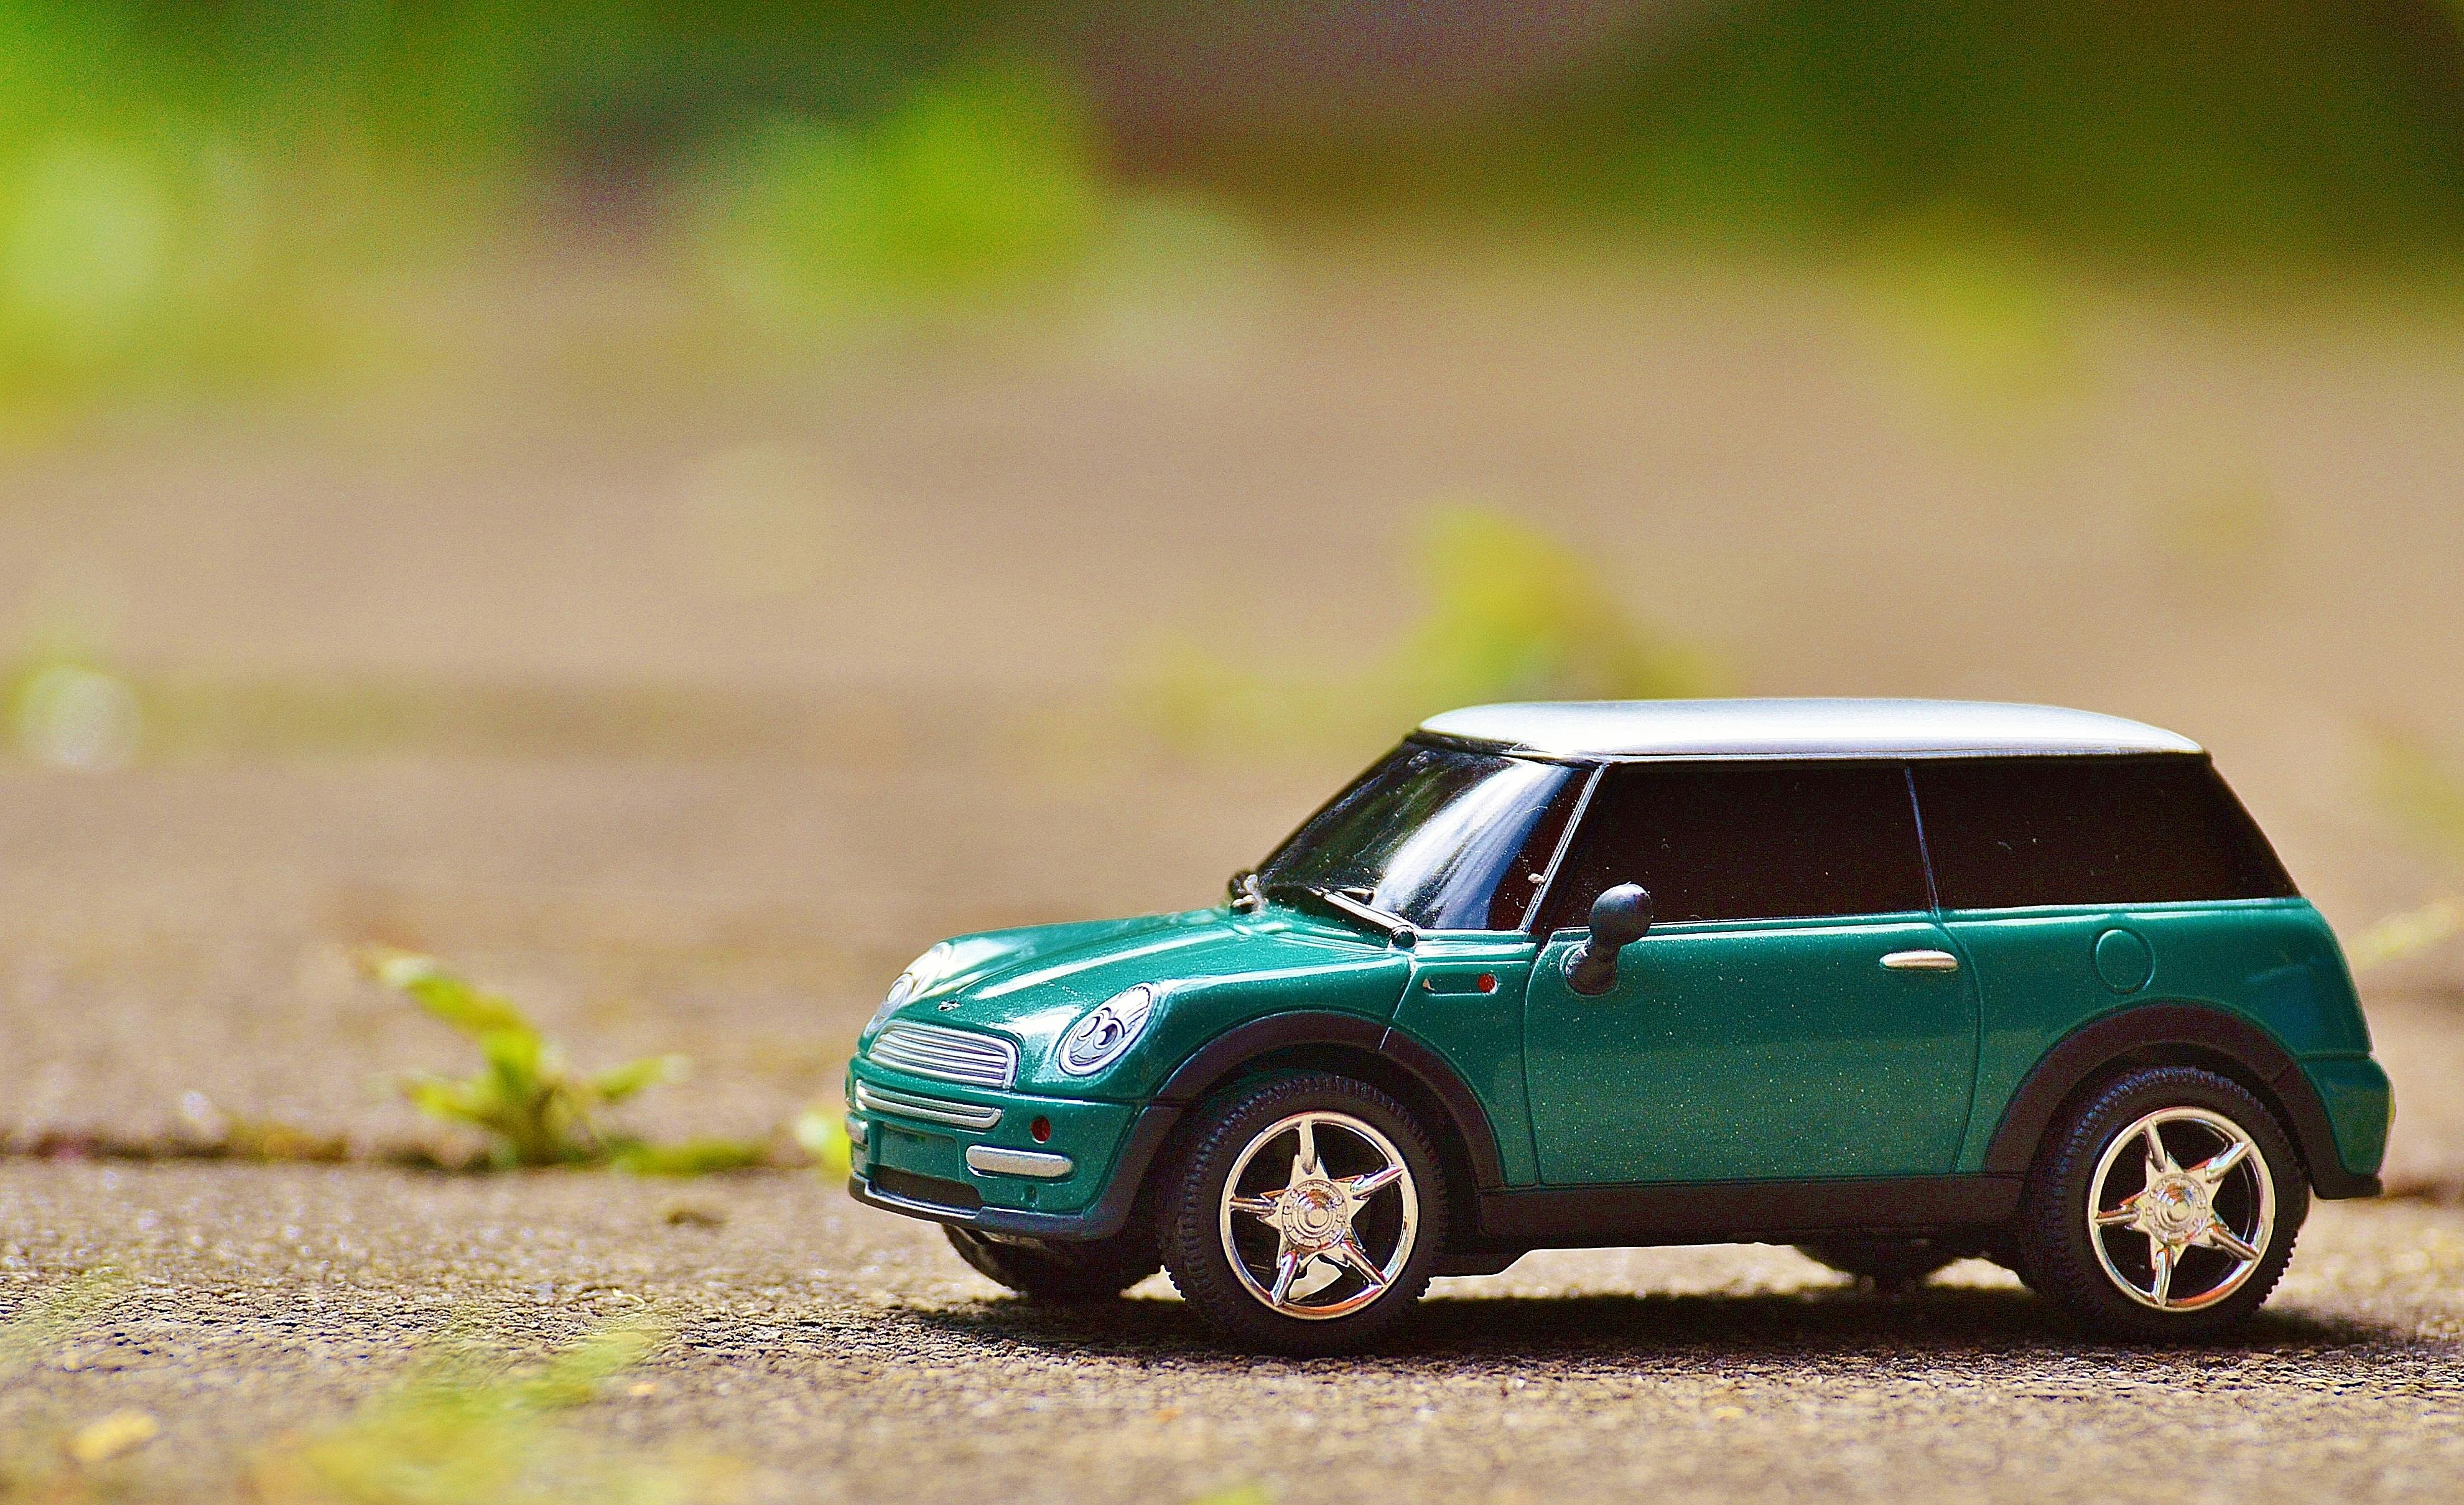 I Create Whimsical Images Using Miniature Model Cars | Miniature  photography, Cool pictures for wallpaper, Cute photography